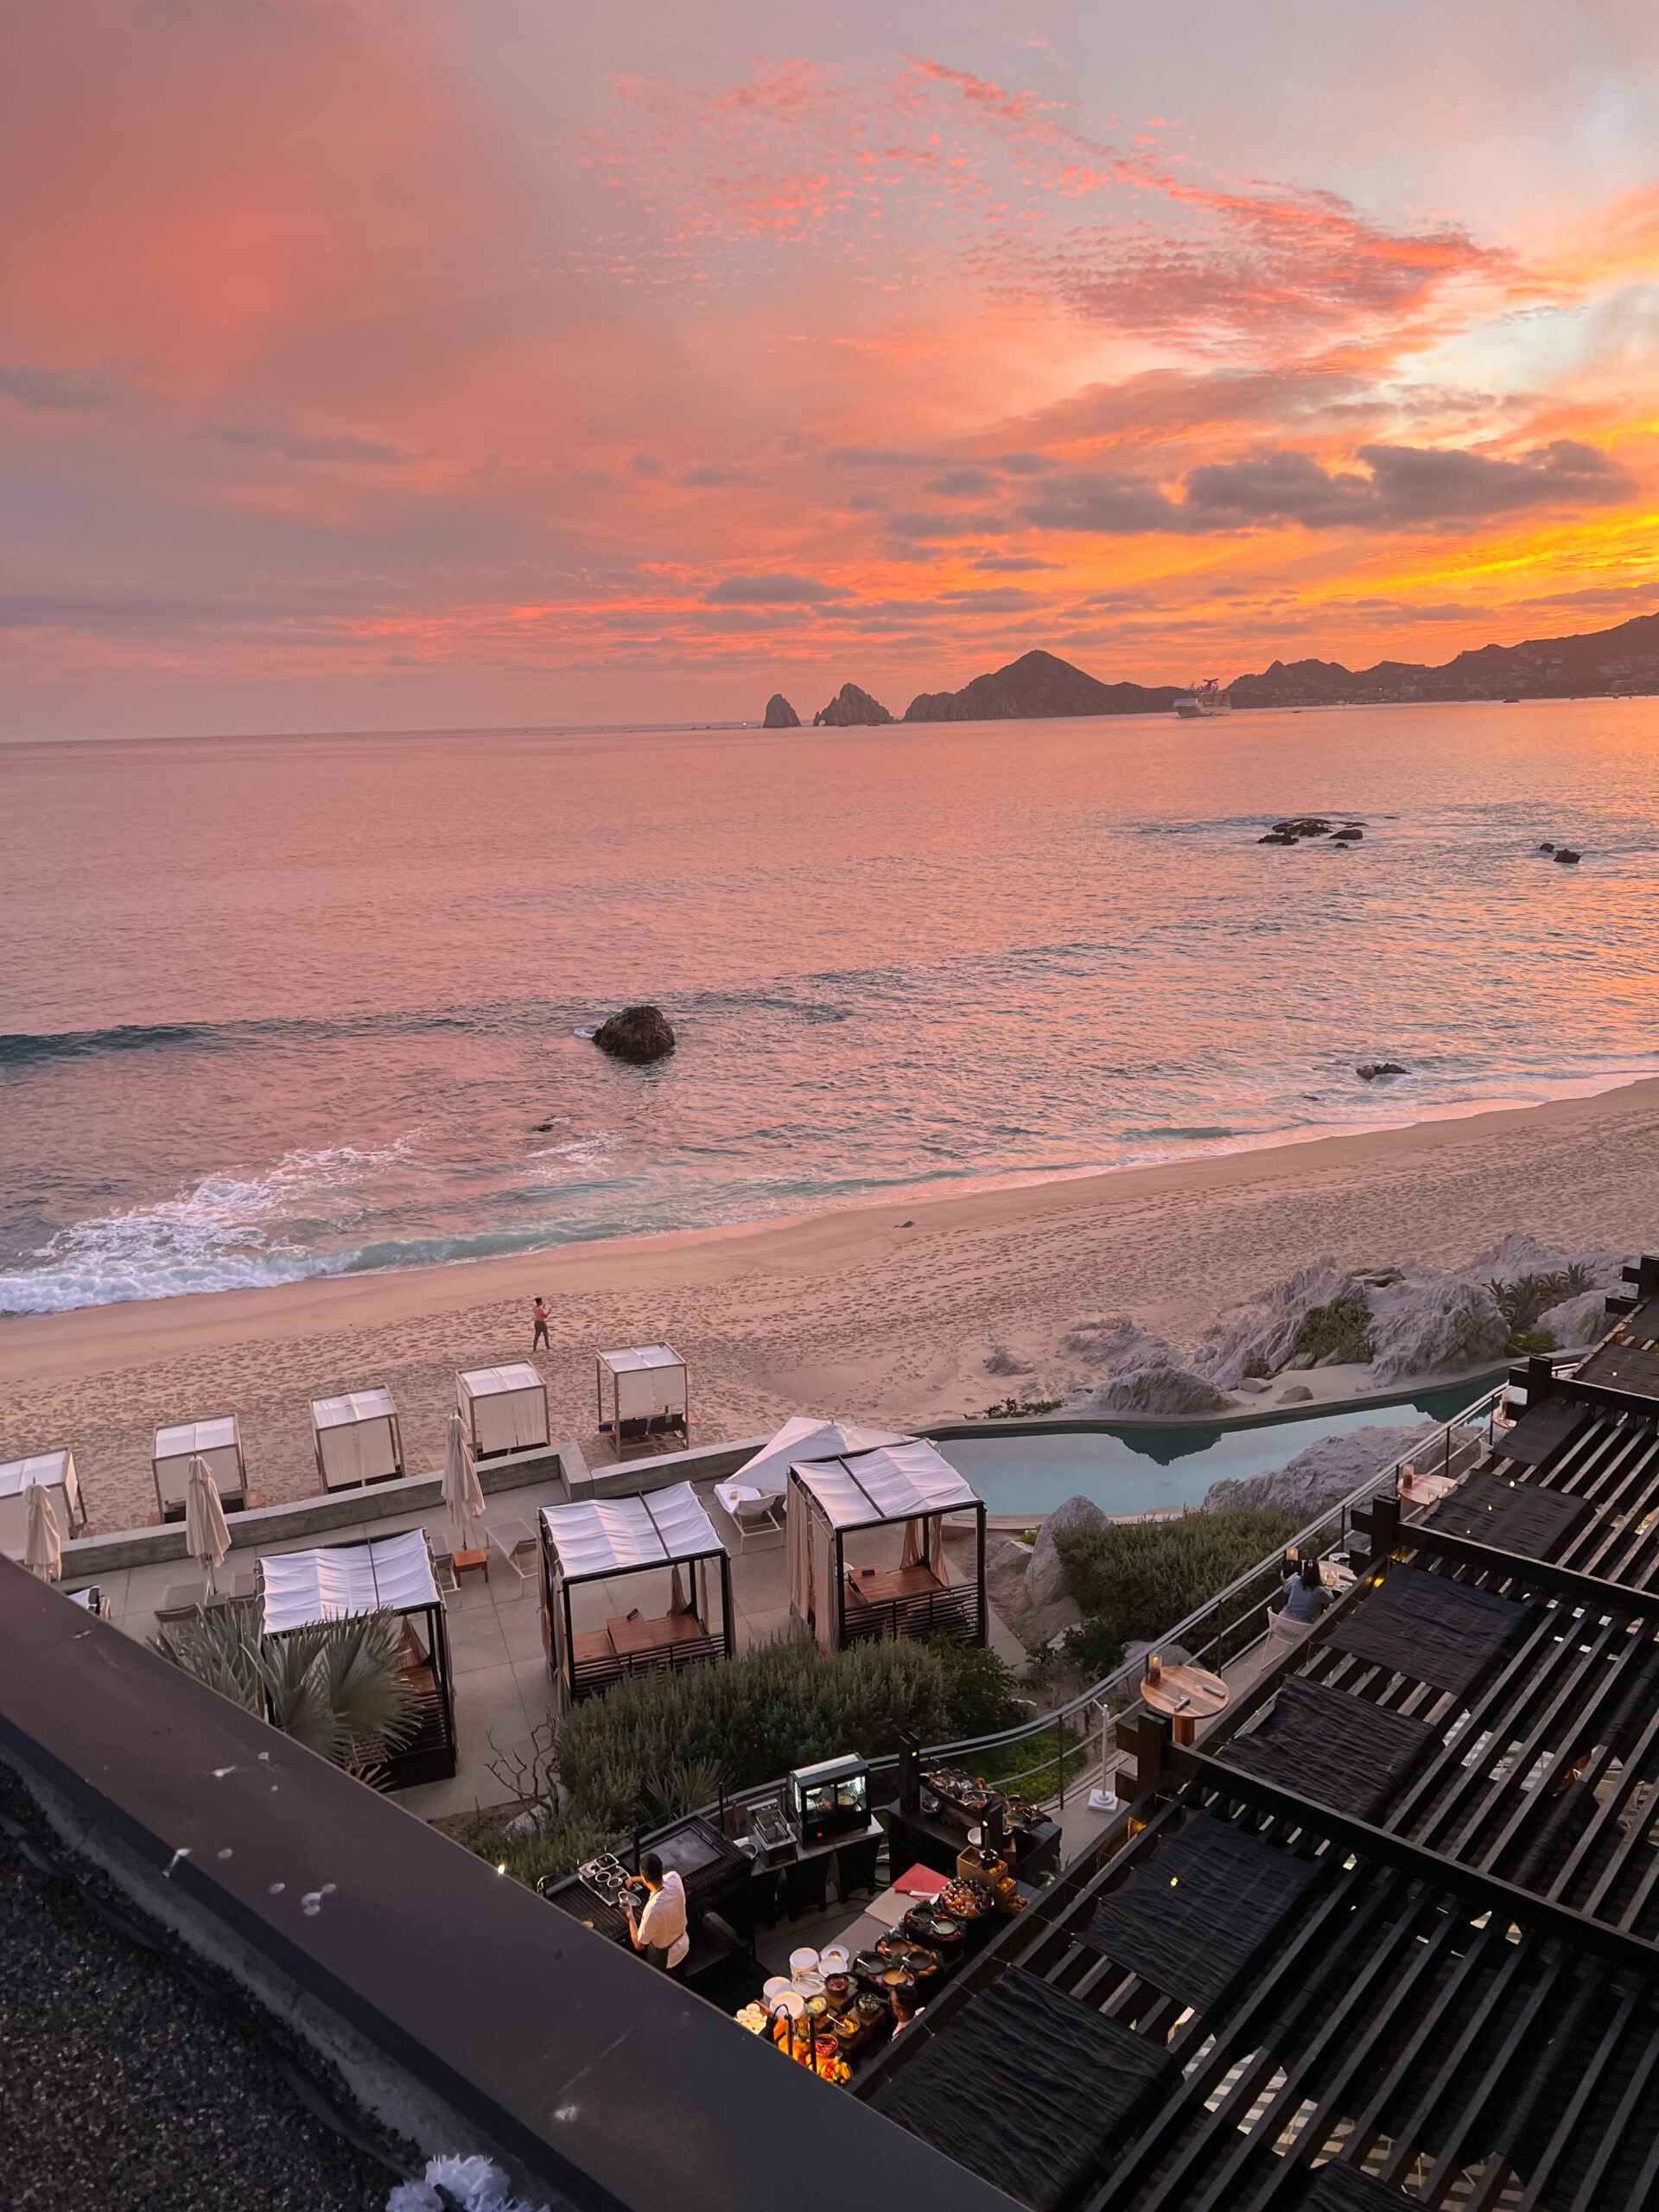 sunset views from our room at The Cape, a Thompson Hotel in Cabo San Lucas, Mexico #travel #beaches #sunsetviews